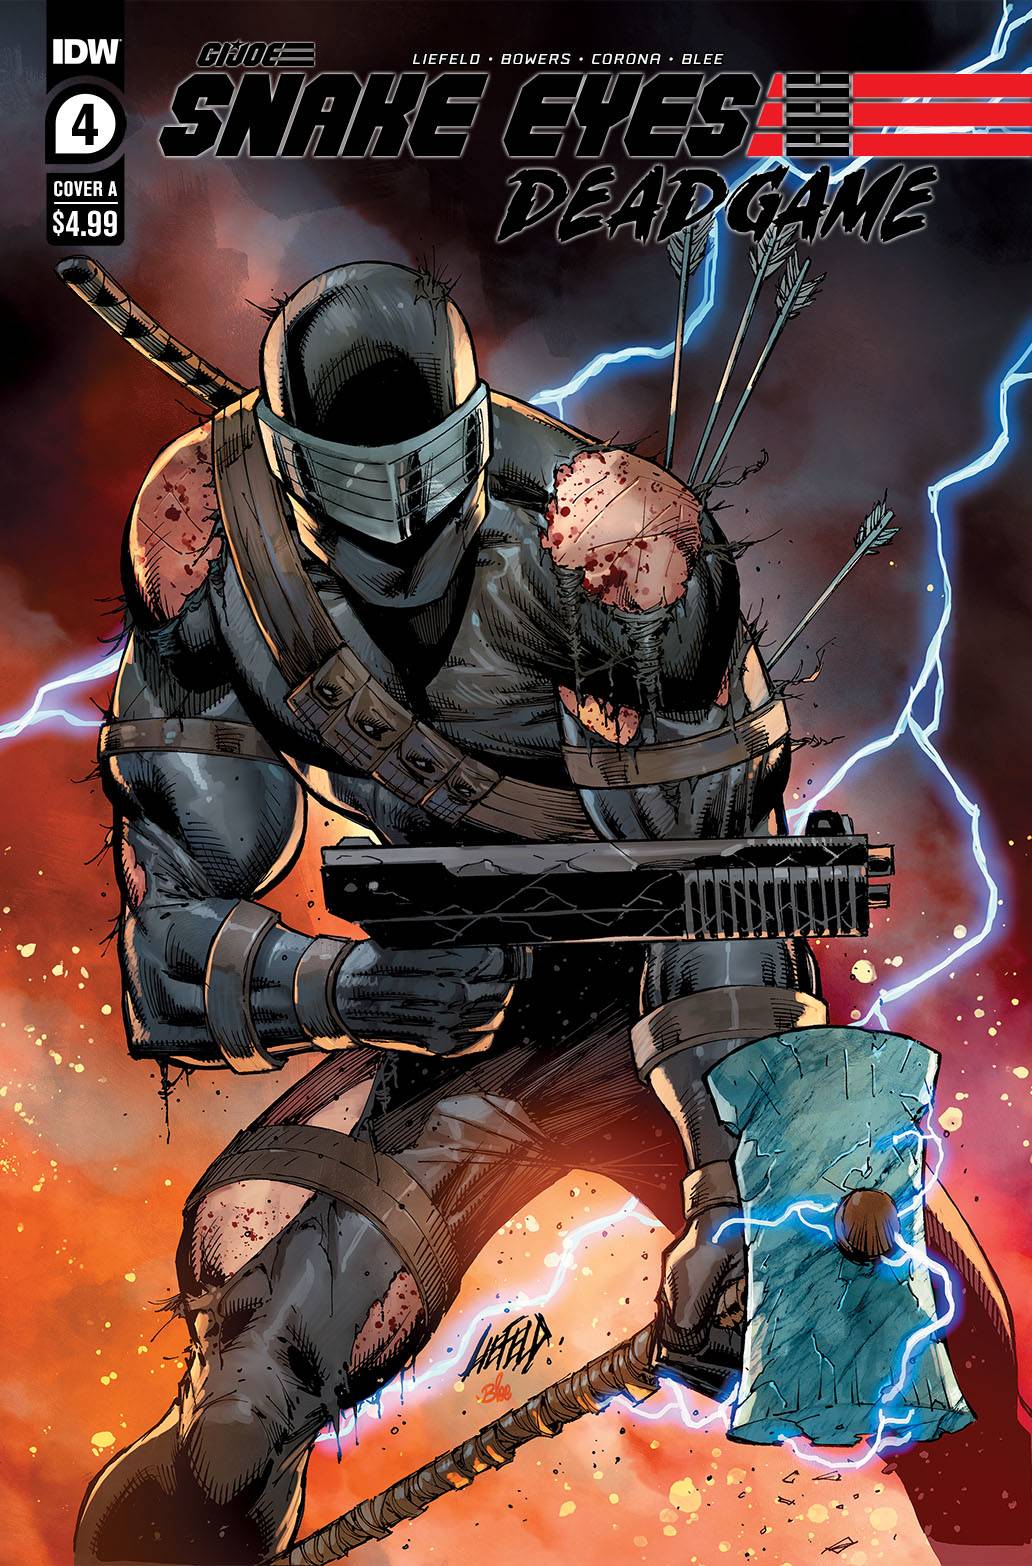 SNAKE EYES DEADGAME #4 (OF 5) CVR A LIEFELD | Game Master's Emporium (The New GME)